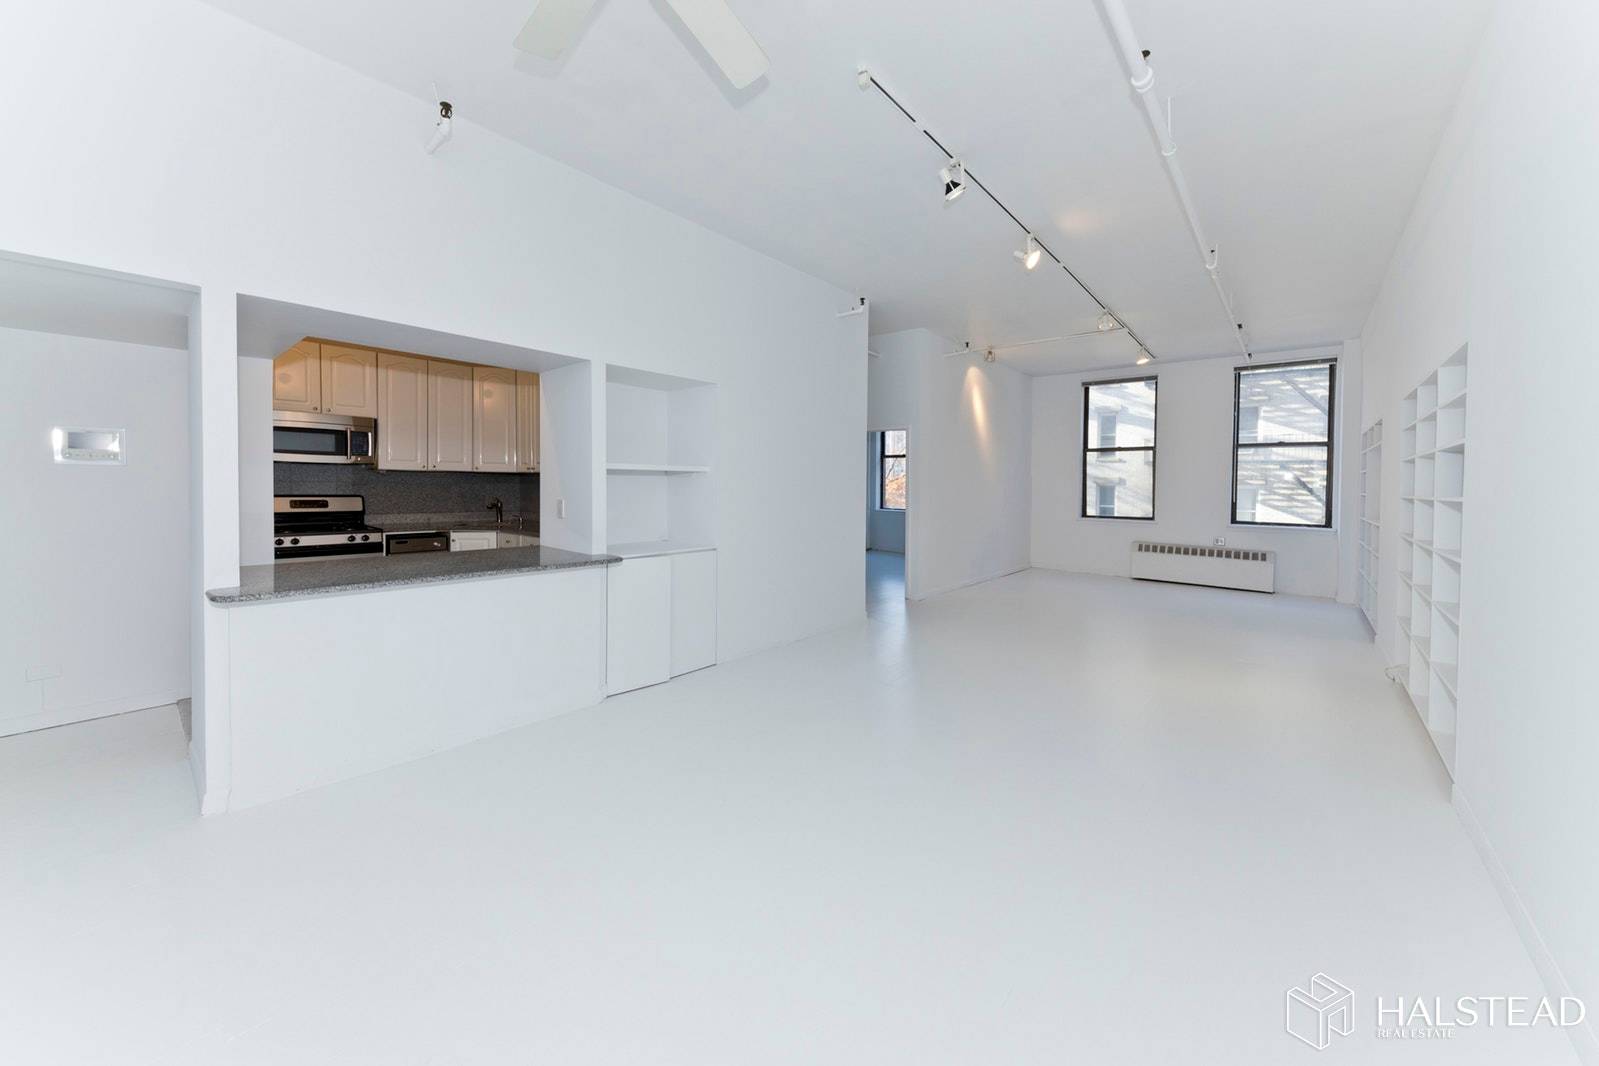 This spacious 2 bedroom, one bath loft like home has 10 foot ceilings and is located on one of Soho's most exciting blocks.